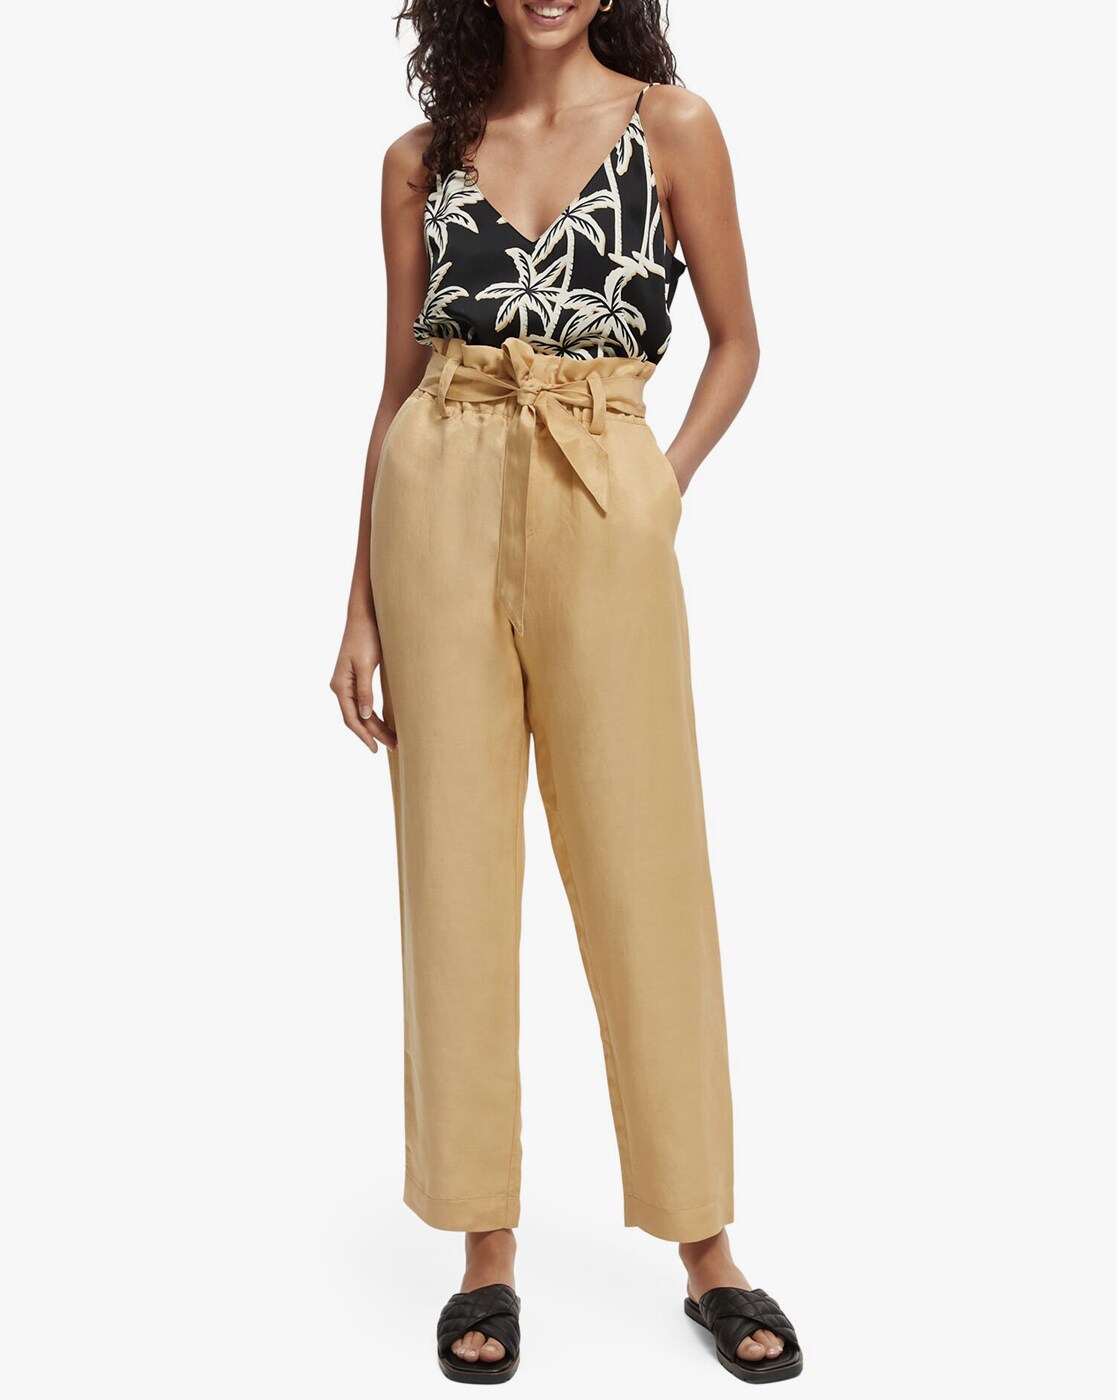 NEW TOPSHOP Rory Paperbag belted Waist Utility Trousers pants khaki mom  cuffs 12 | eBay